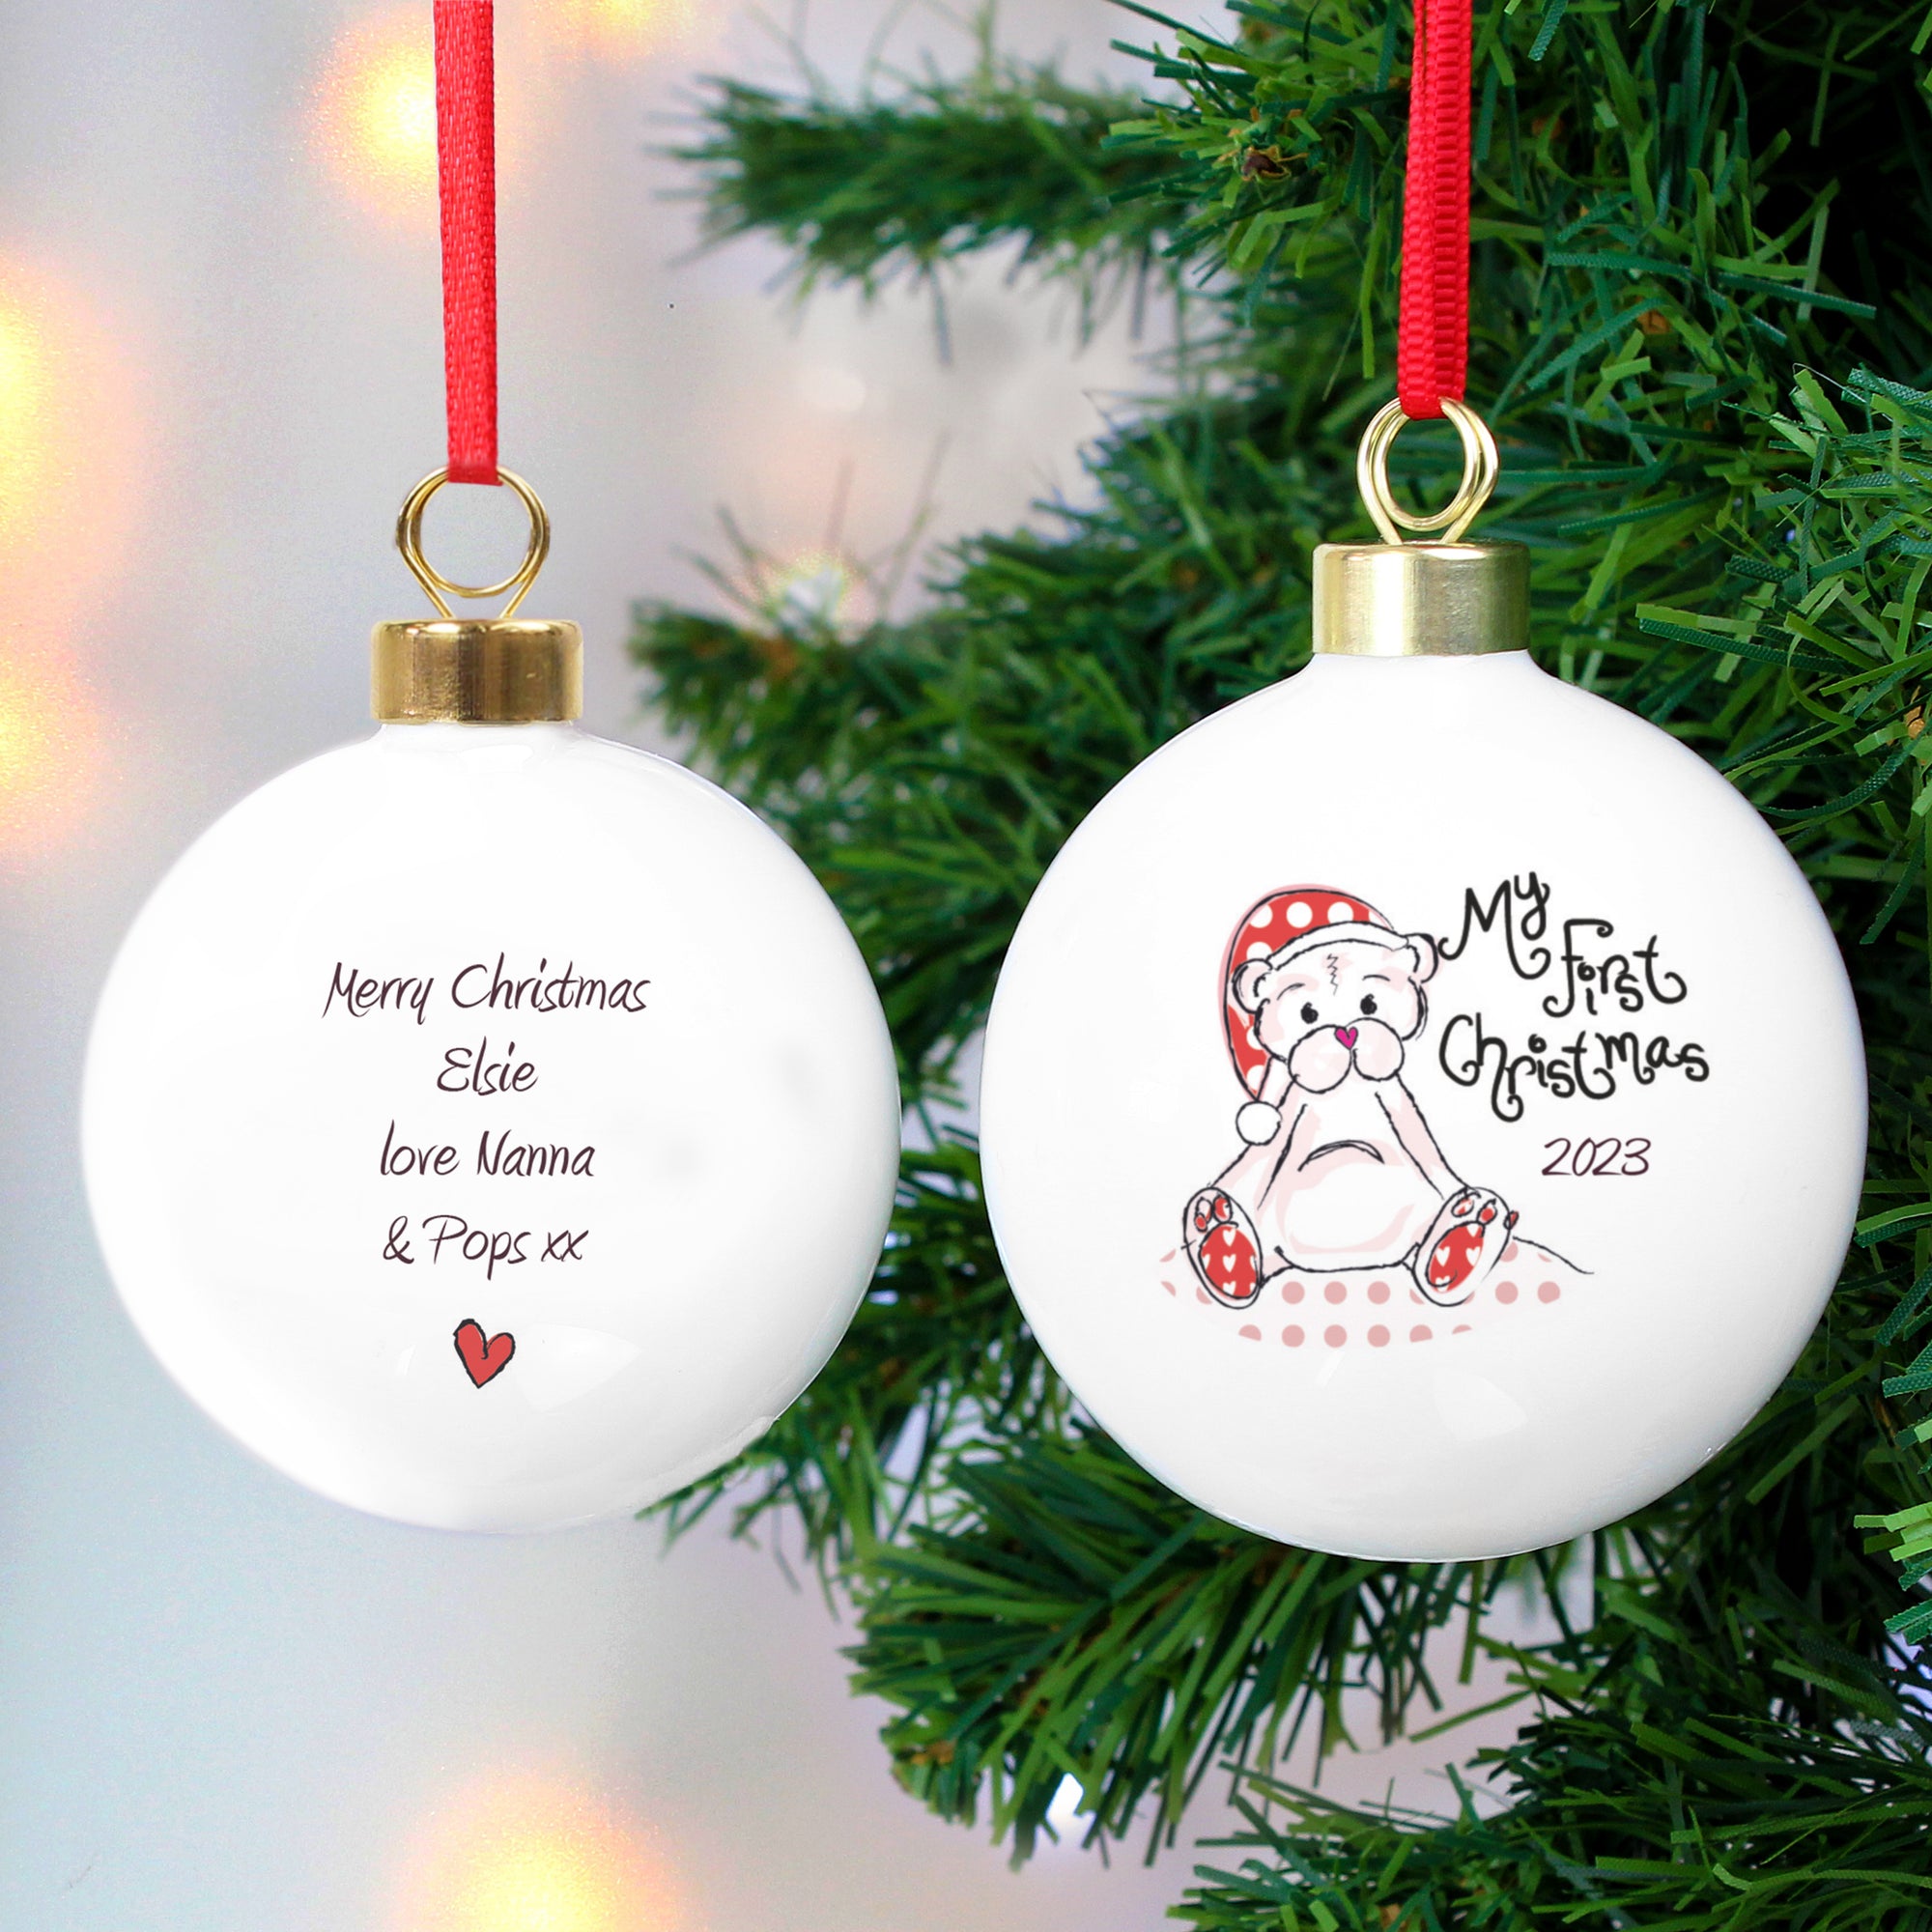 Personalised 'My First Christmas' bauble featuring an image of a hand-drawn bear wearing a Christmas hat on the front of the bauble with the wording 'My First Christmas'. You can also add a year of your choice to the front of the bauble and the rear can be personalised with a message of your choice over up to 4 lines.